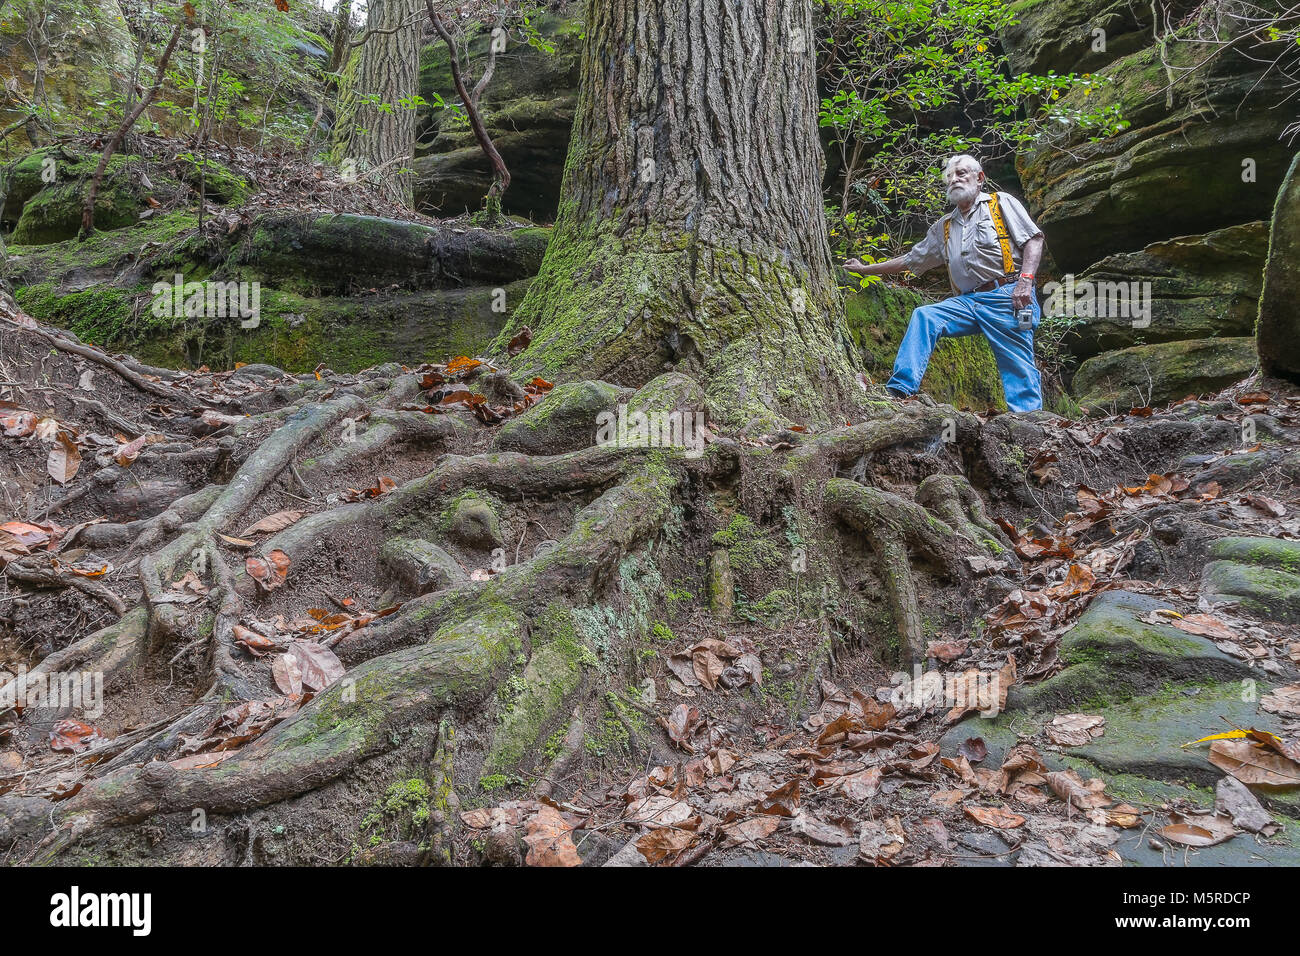 A man dwarfed by the size of a large fir tree in Franklin County, Alabama. Stock Photo